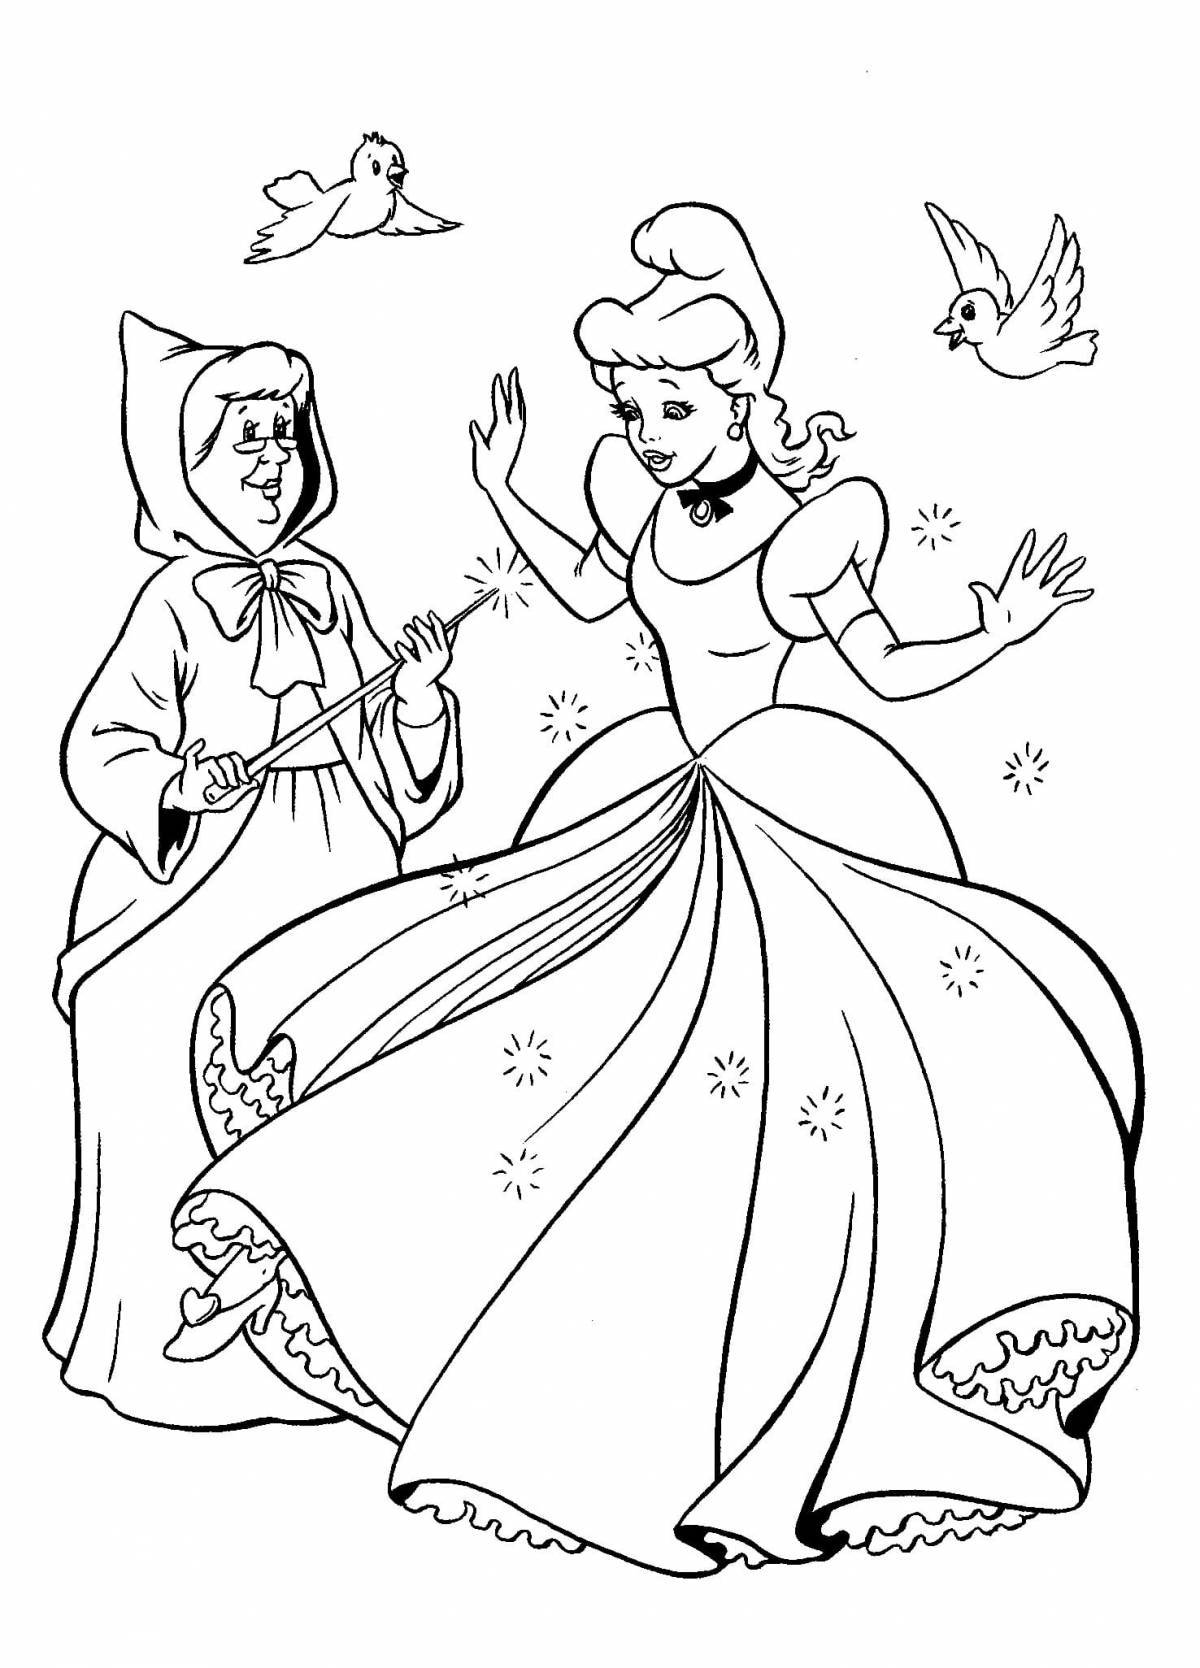 Glowing Cinderella coloring book for kids